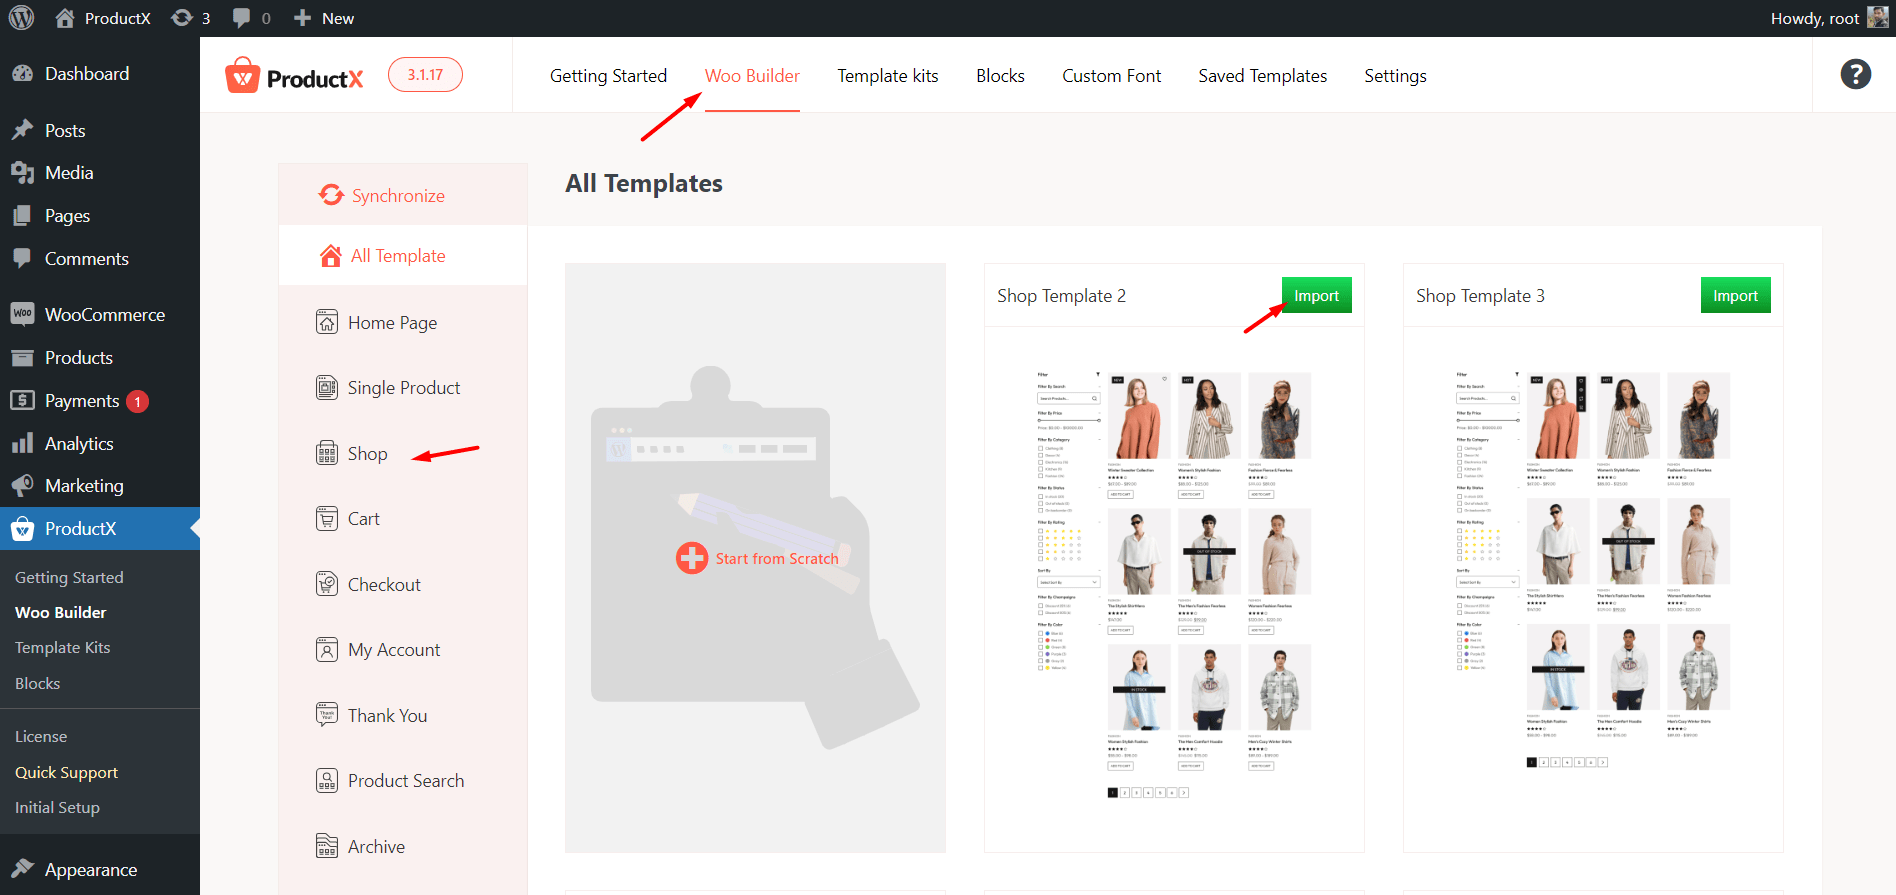 Importing a Premade Template for Shop Page